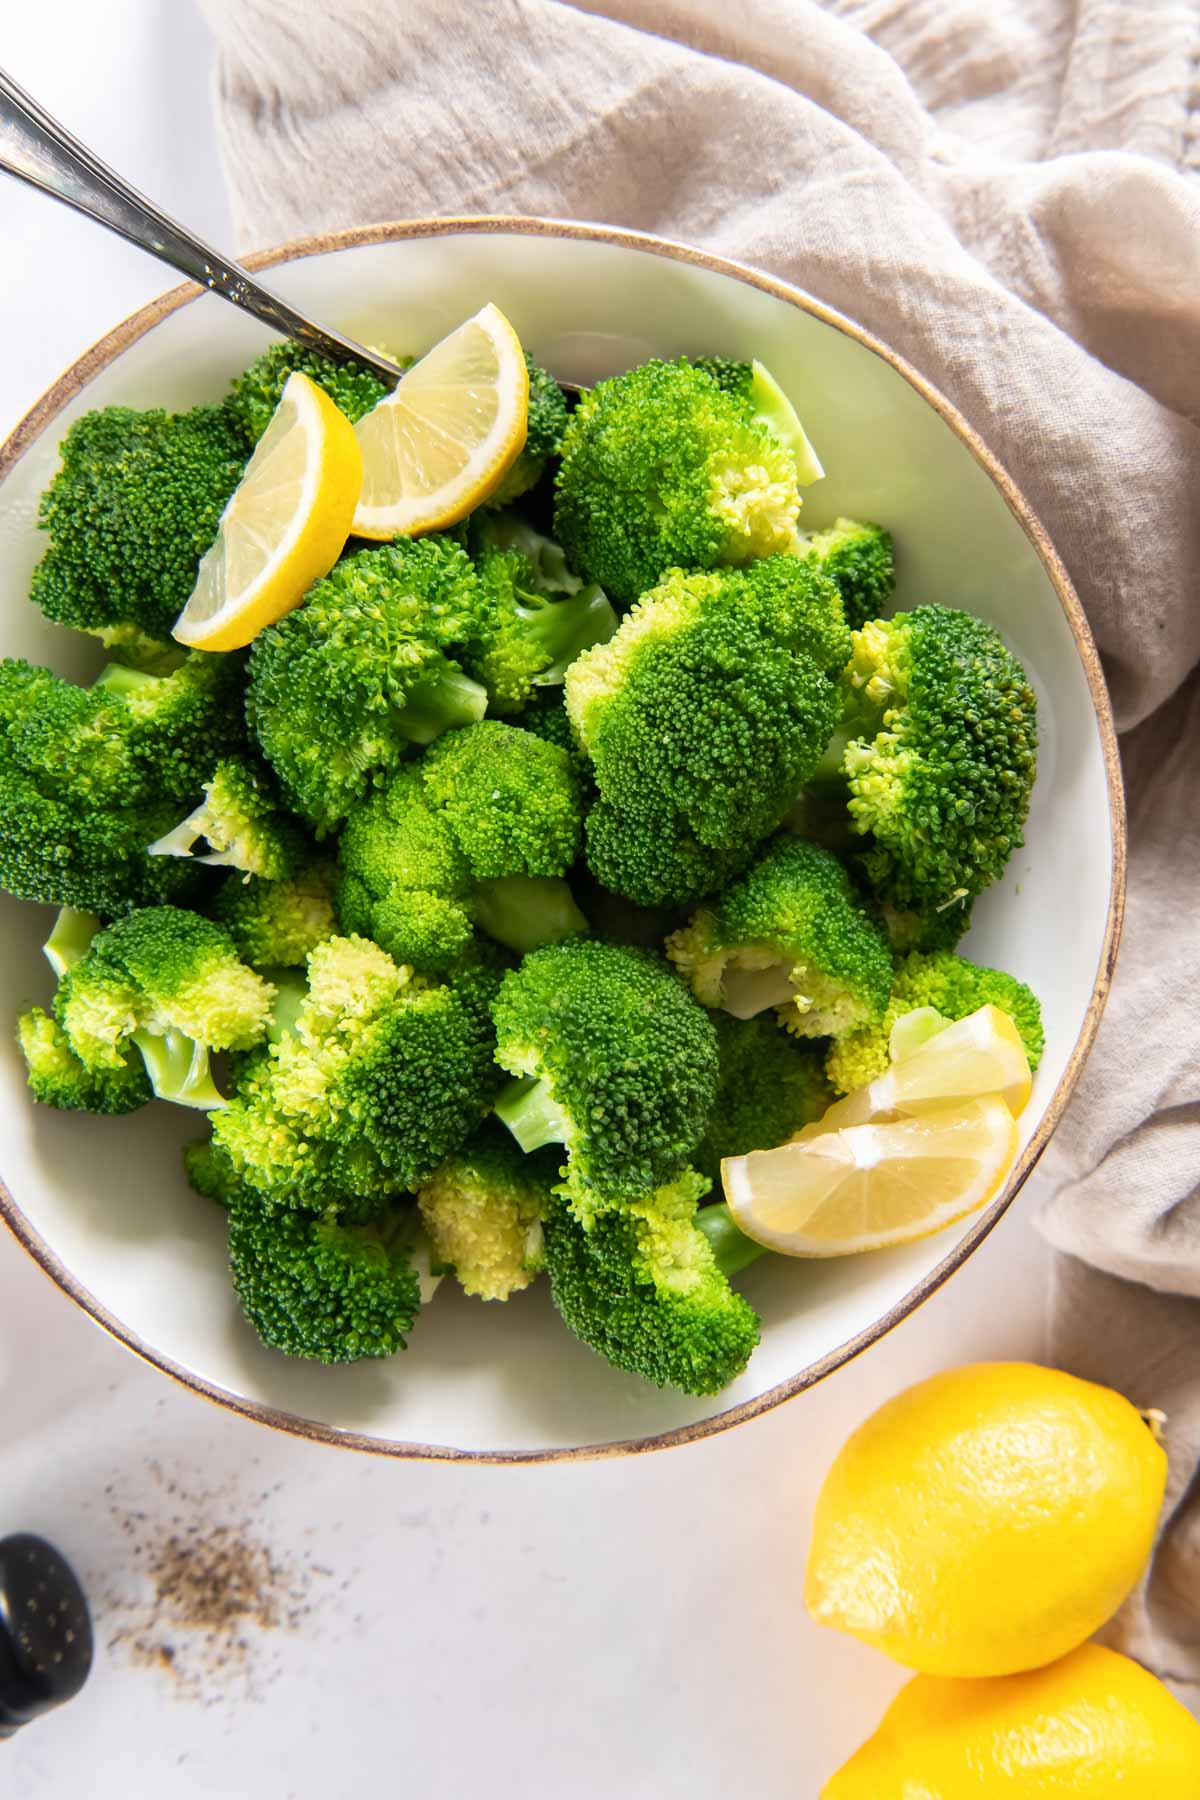 Steamed broccoli with lemon wedges in a serving bowl.